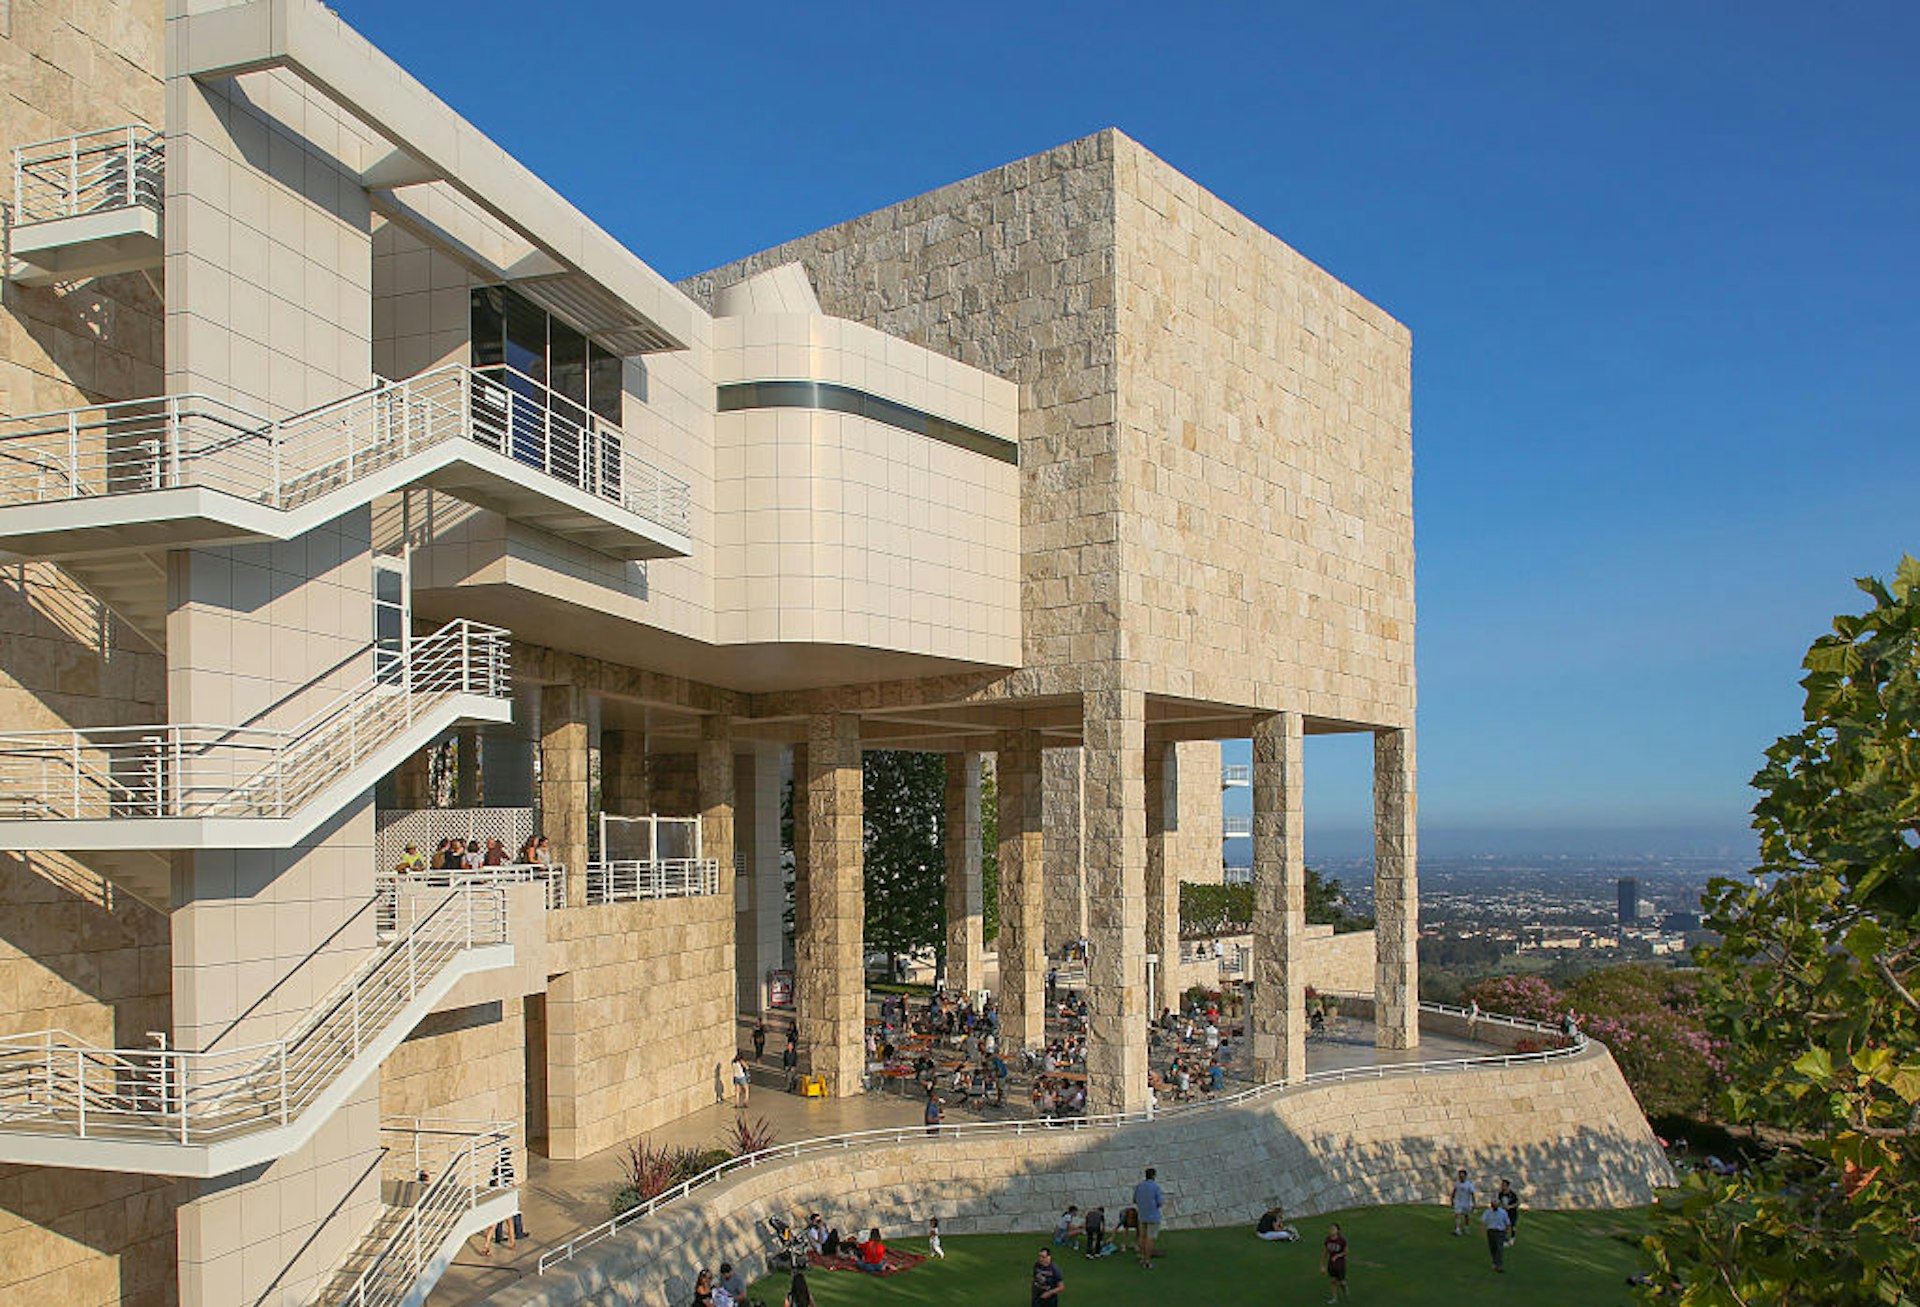 Getty Center's exterior on a sunny day